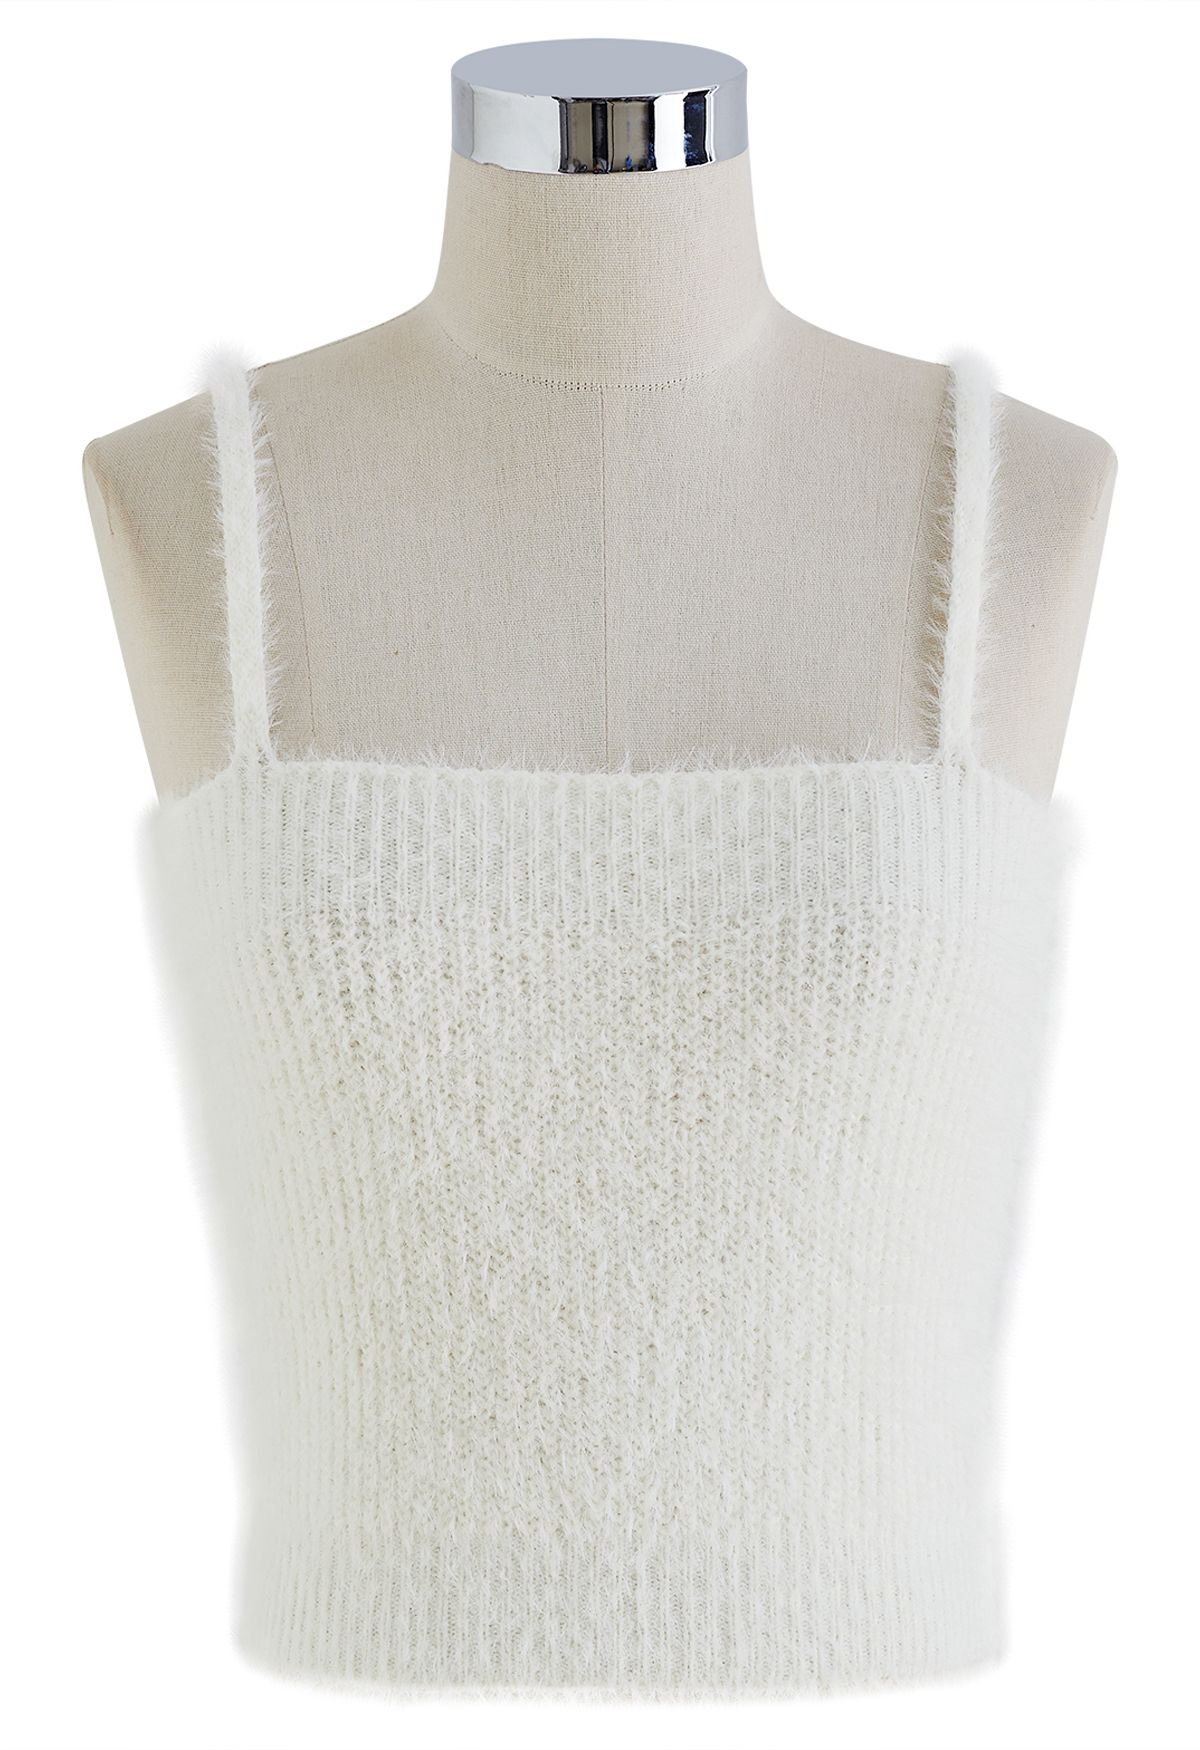 Extra Soft Fuzzy Knit Cami Top and Cardigan Set in Cream